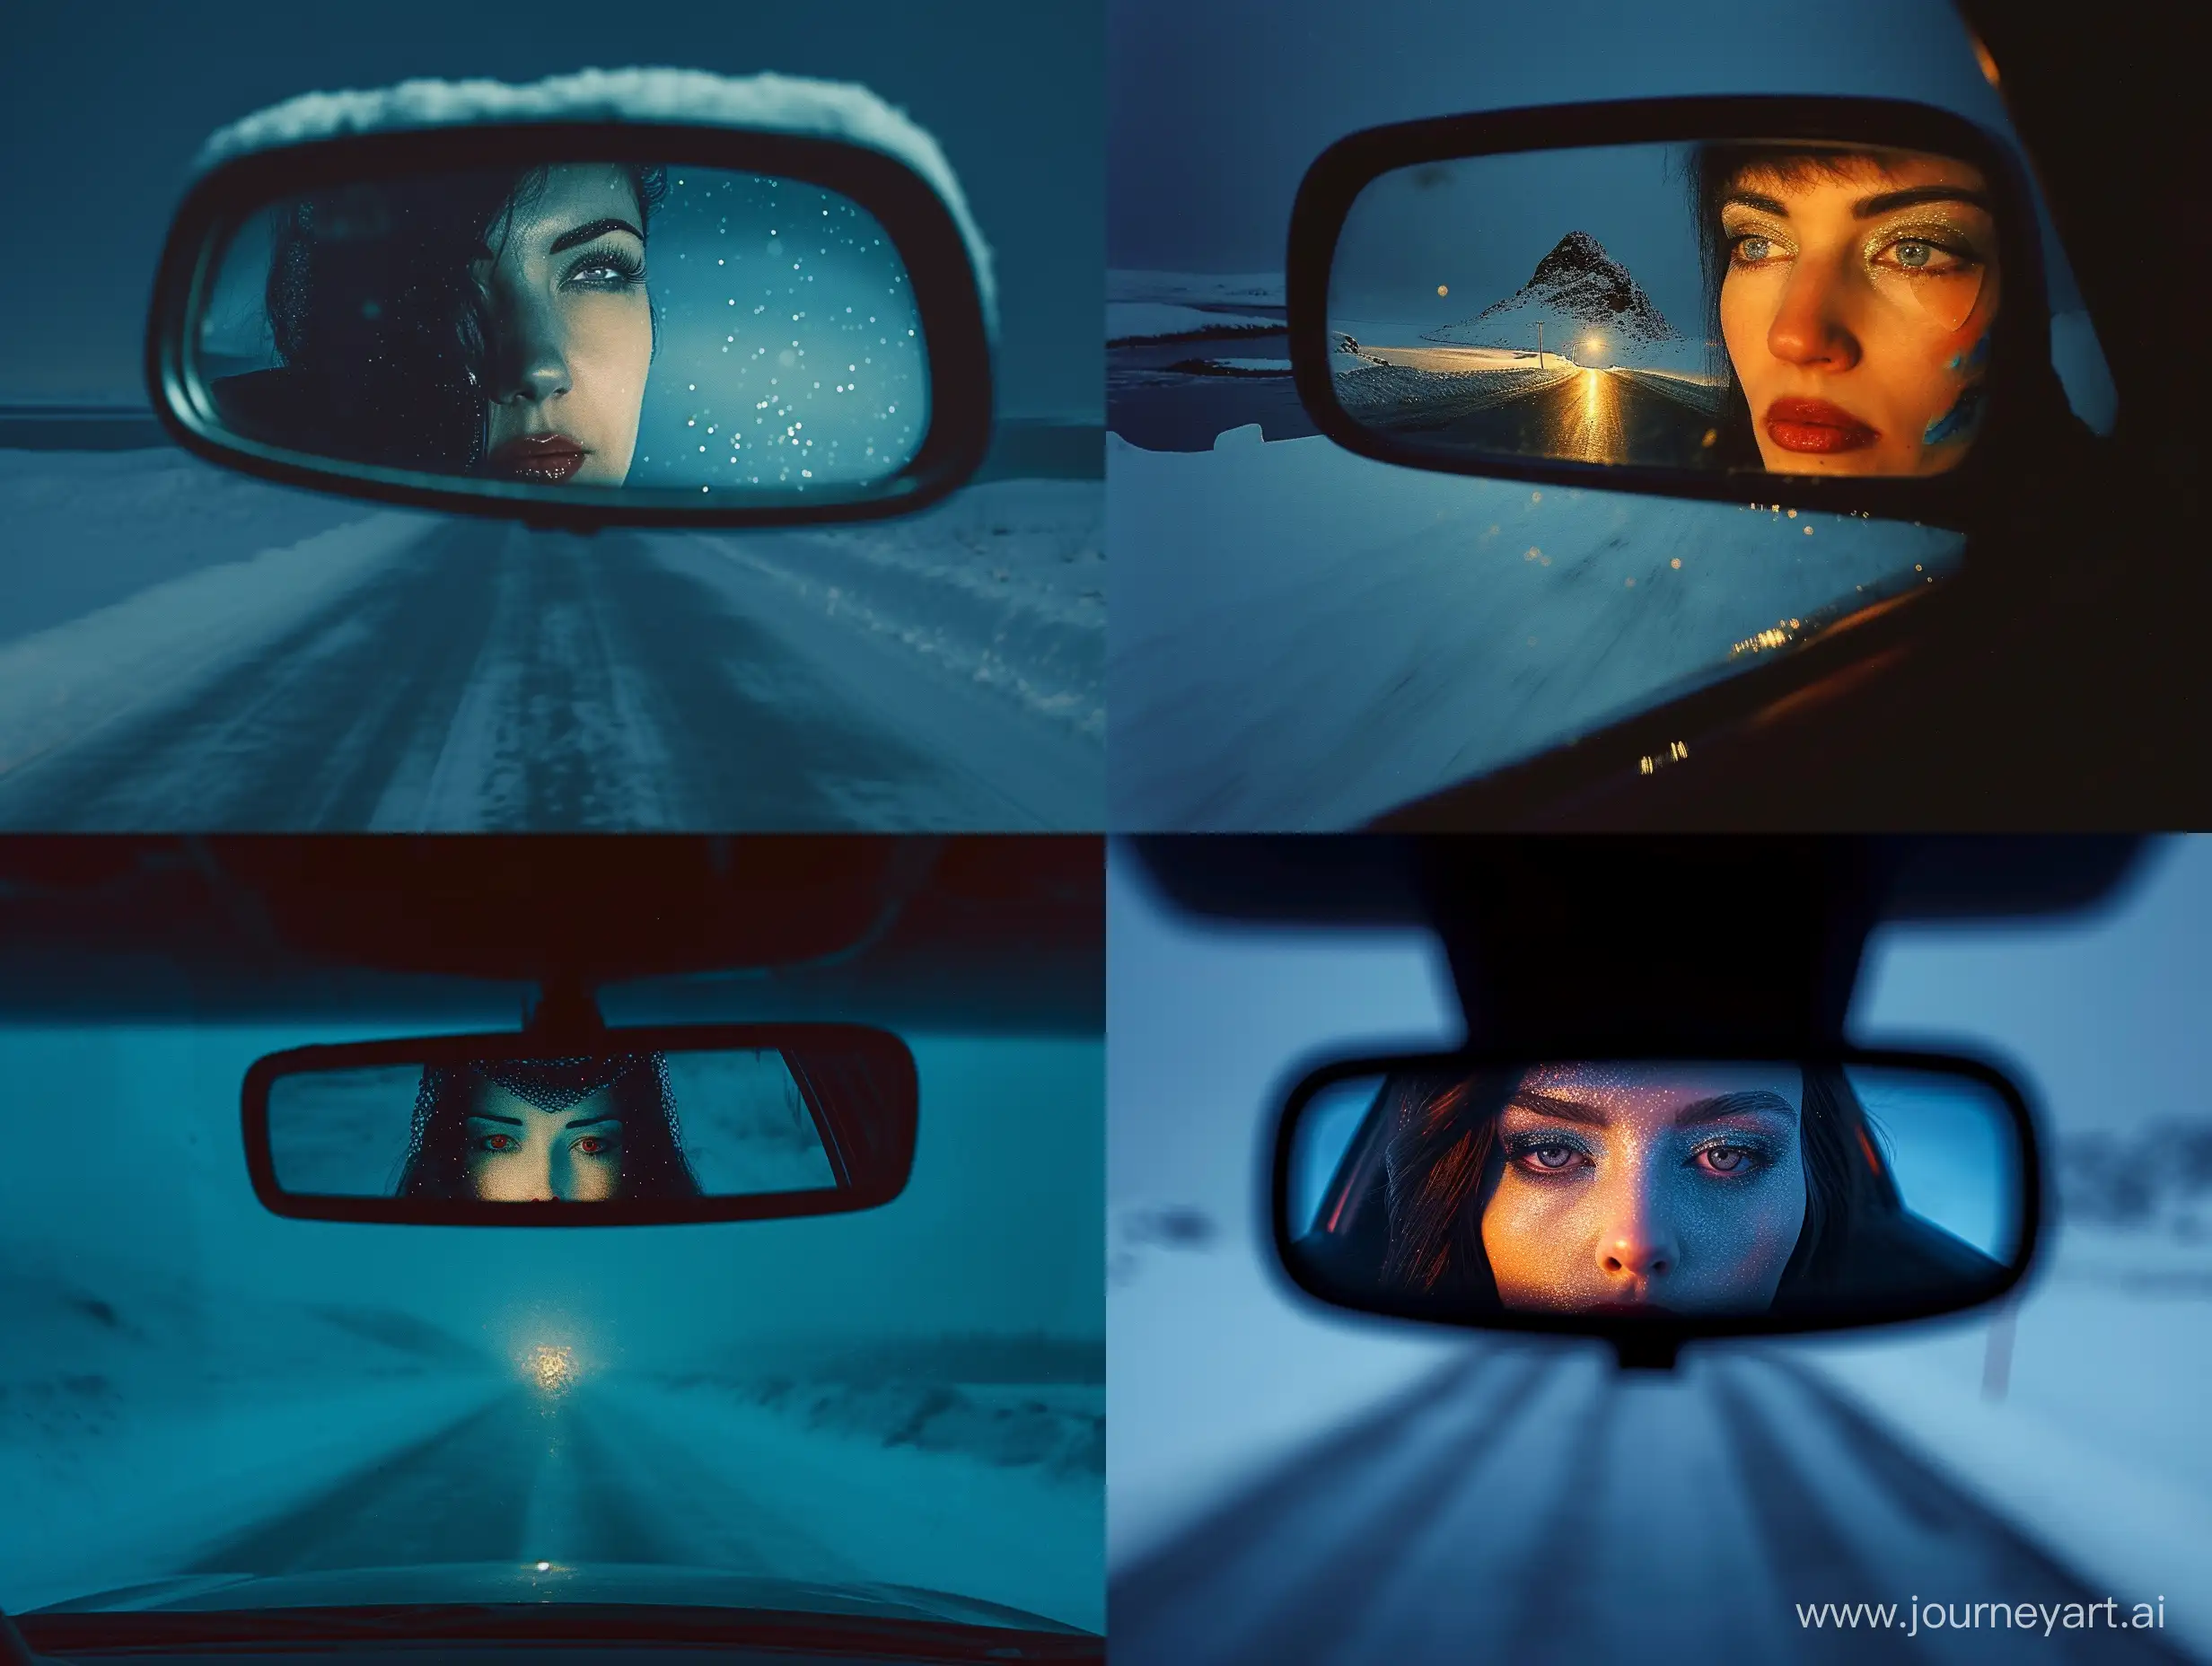 Enigmatic-Night-Drive-Surreal-Cinematic-Still-with-Daliesque-Optical-Illusion